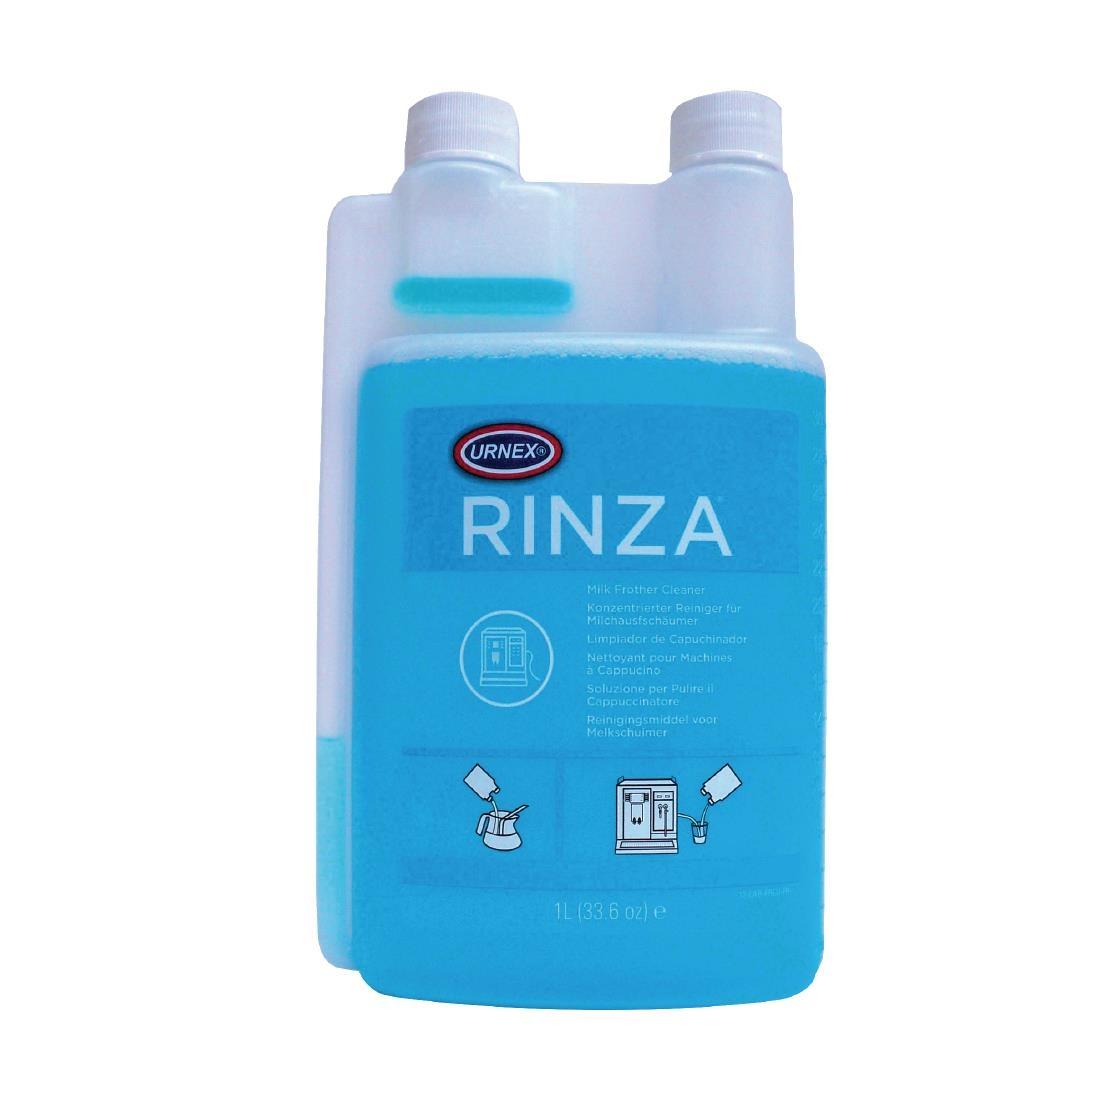 Urnex Rinza Alkaline Milk Frother Cleaner Concentrate 1.1Ltr - GG952  - 1